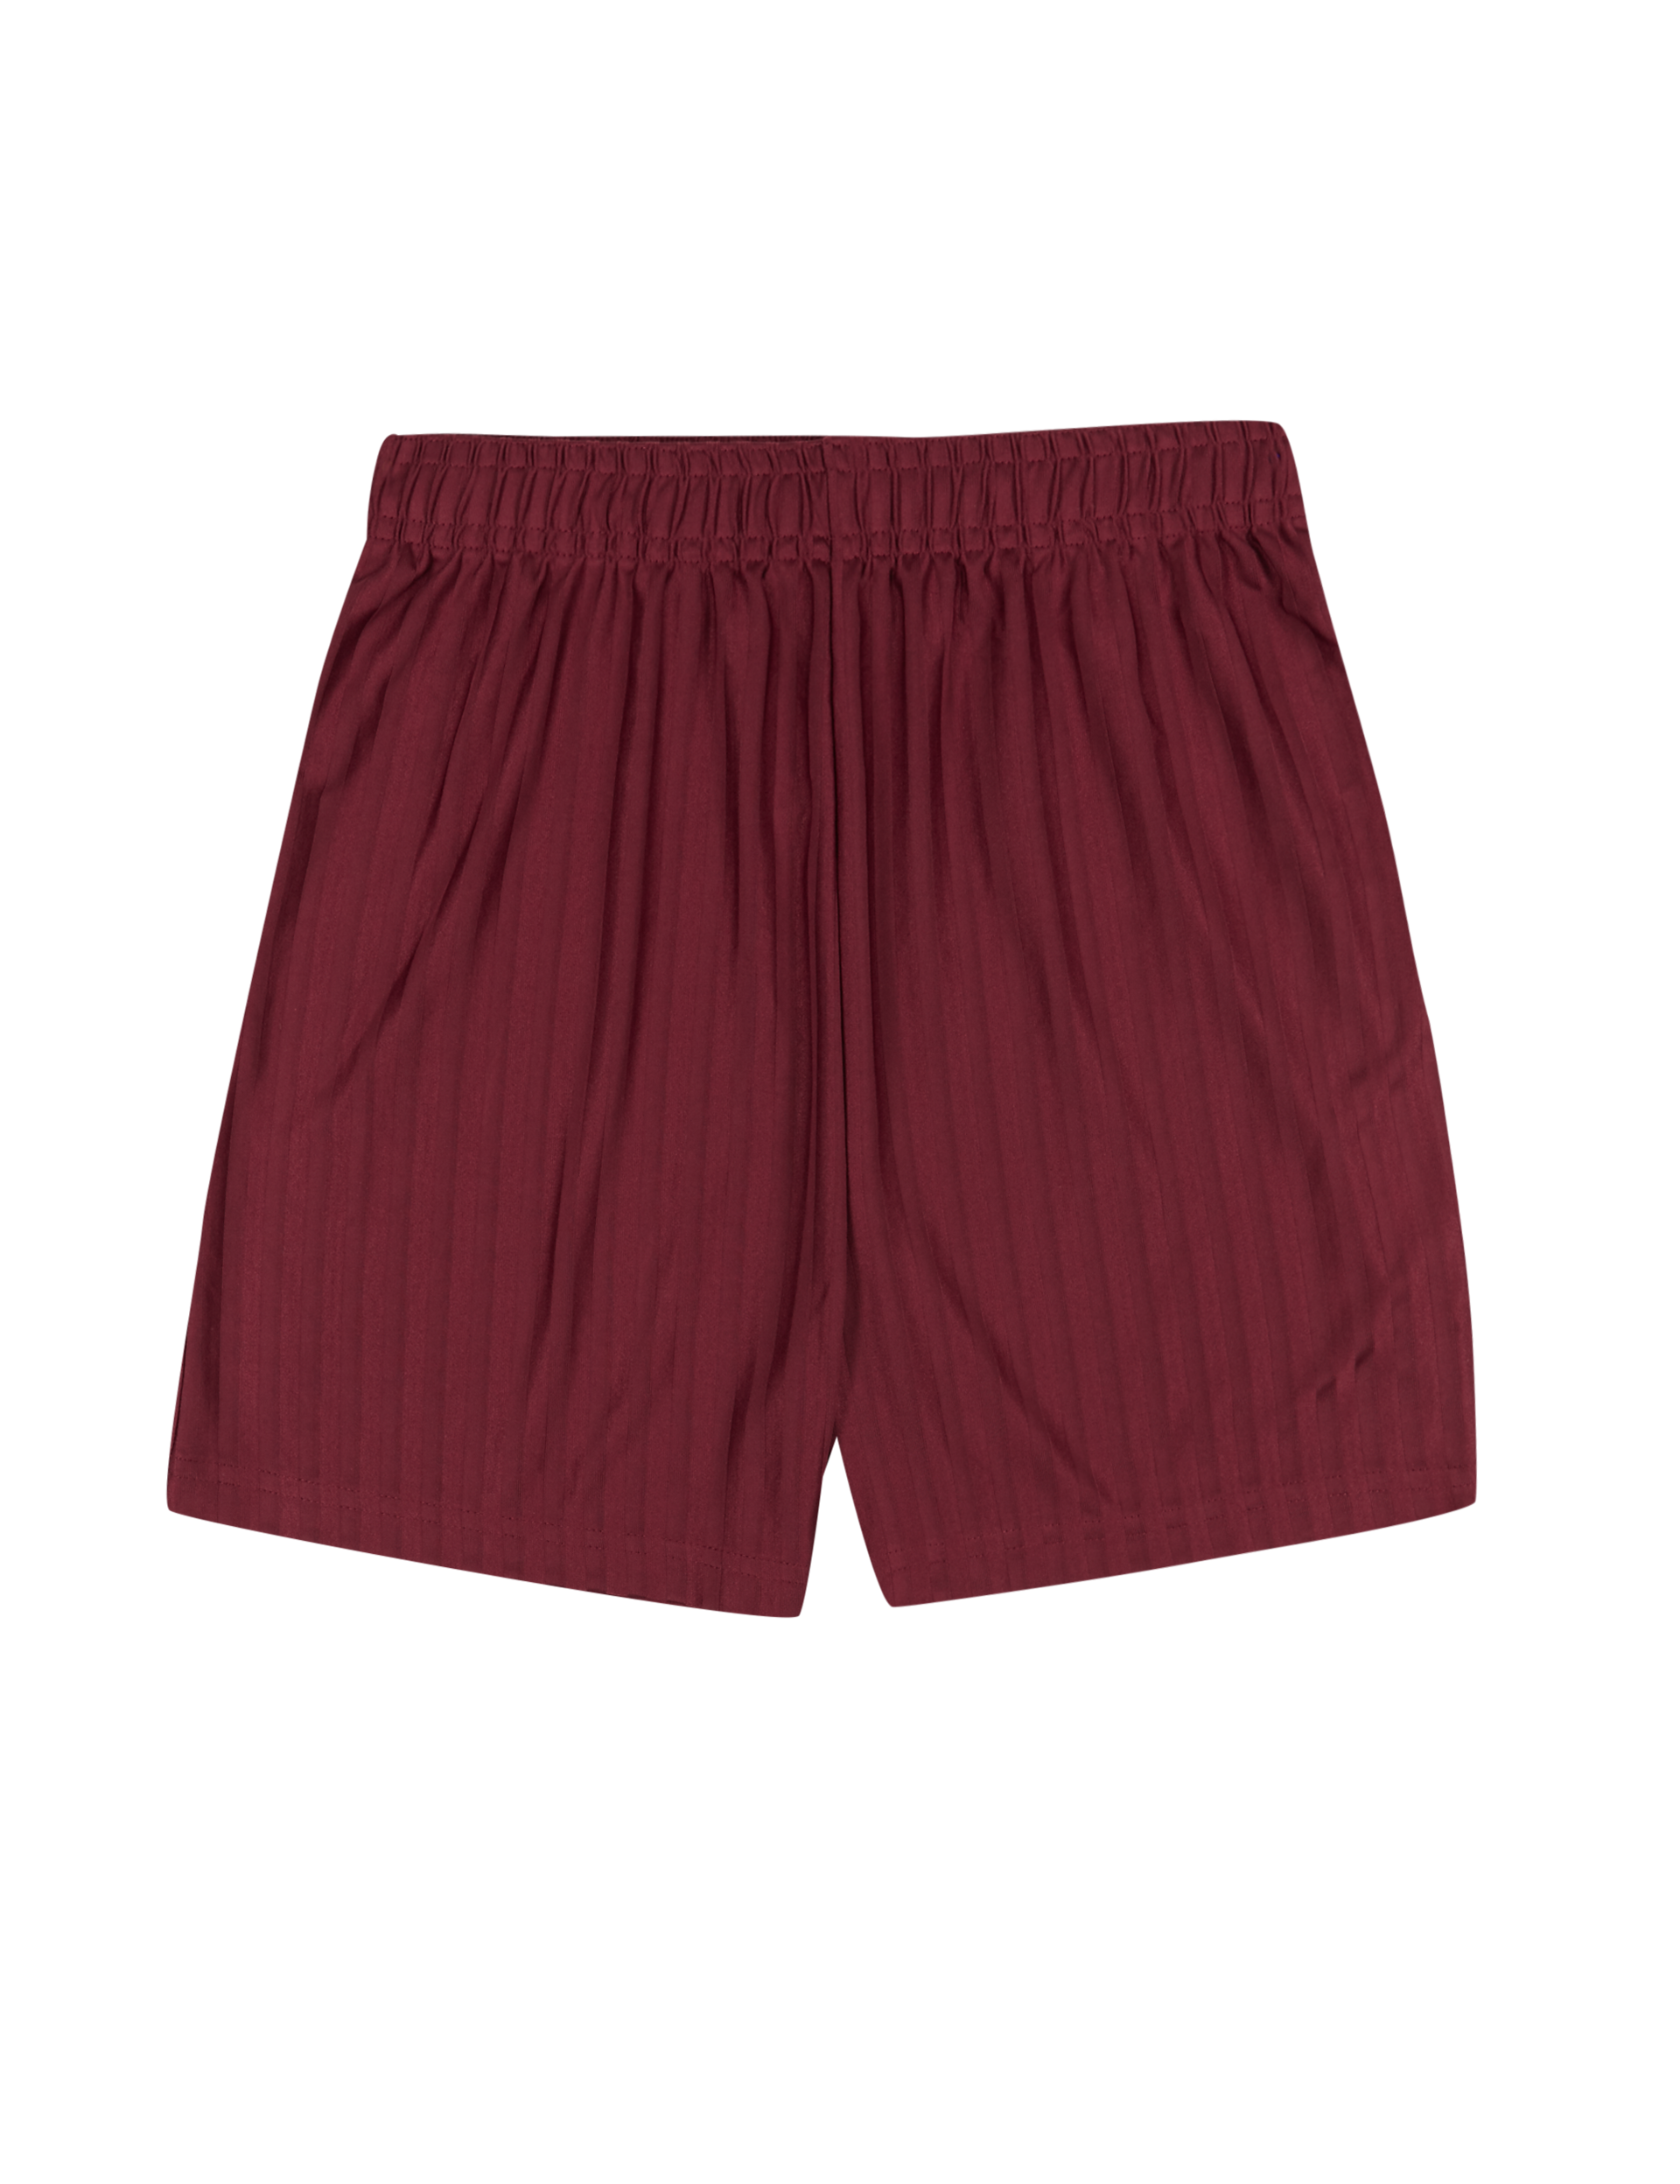 Unisex Polyester Red Sports Shorts